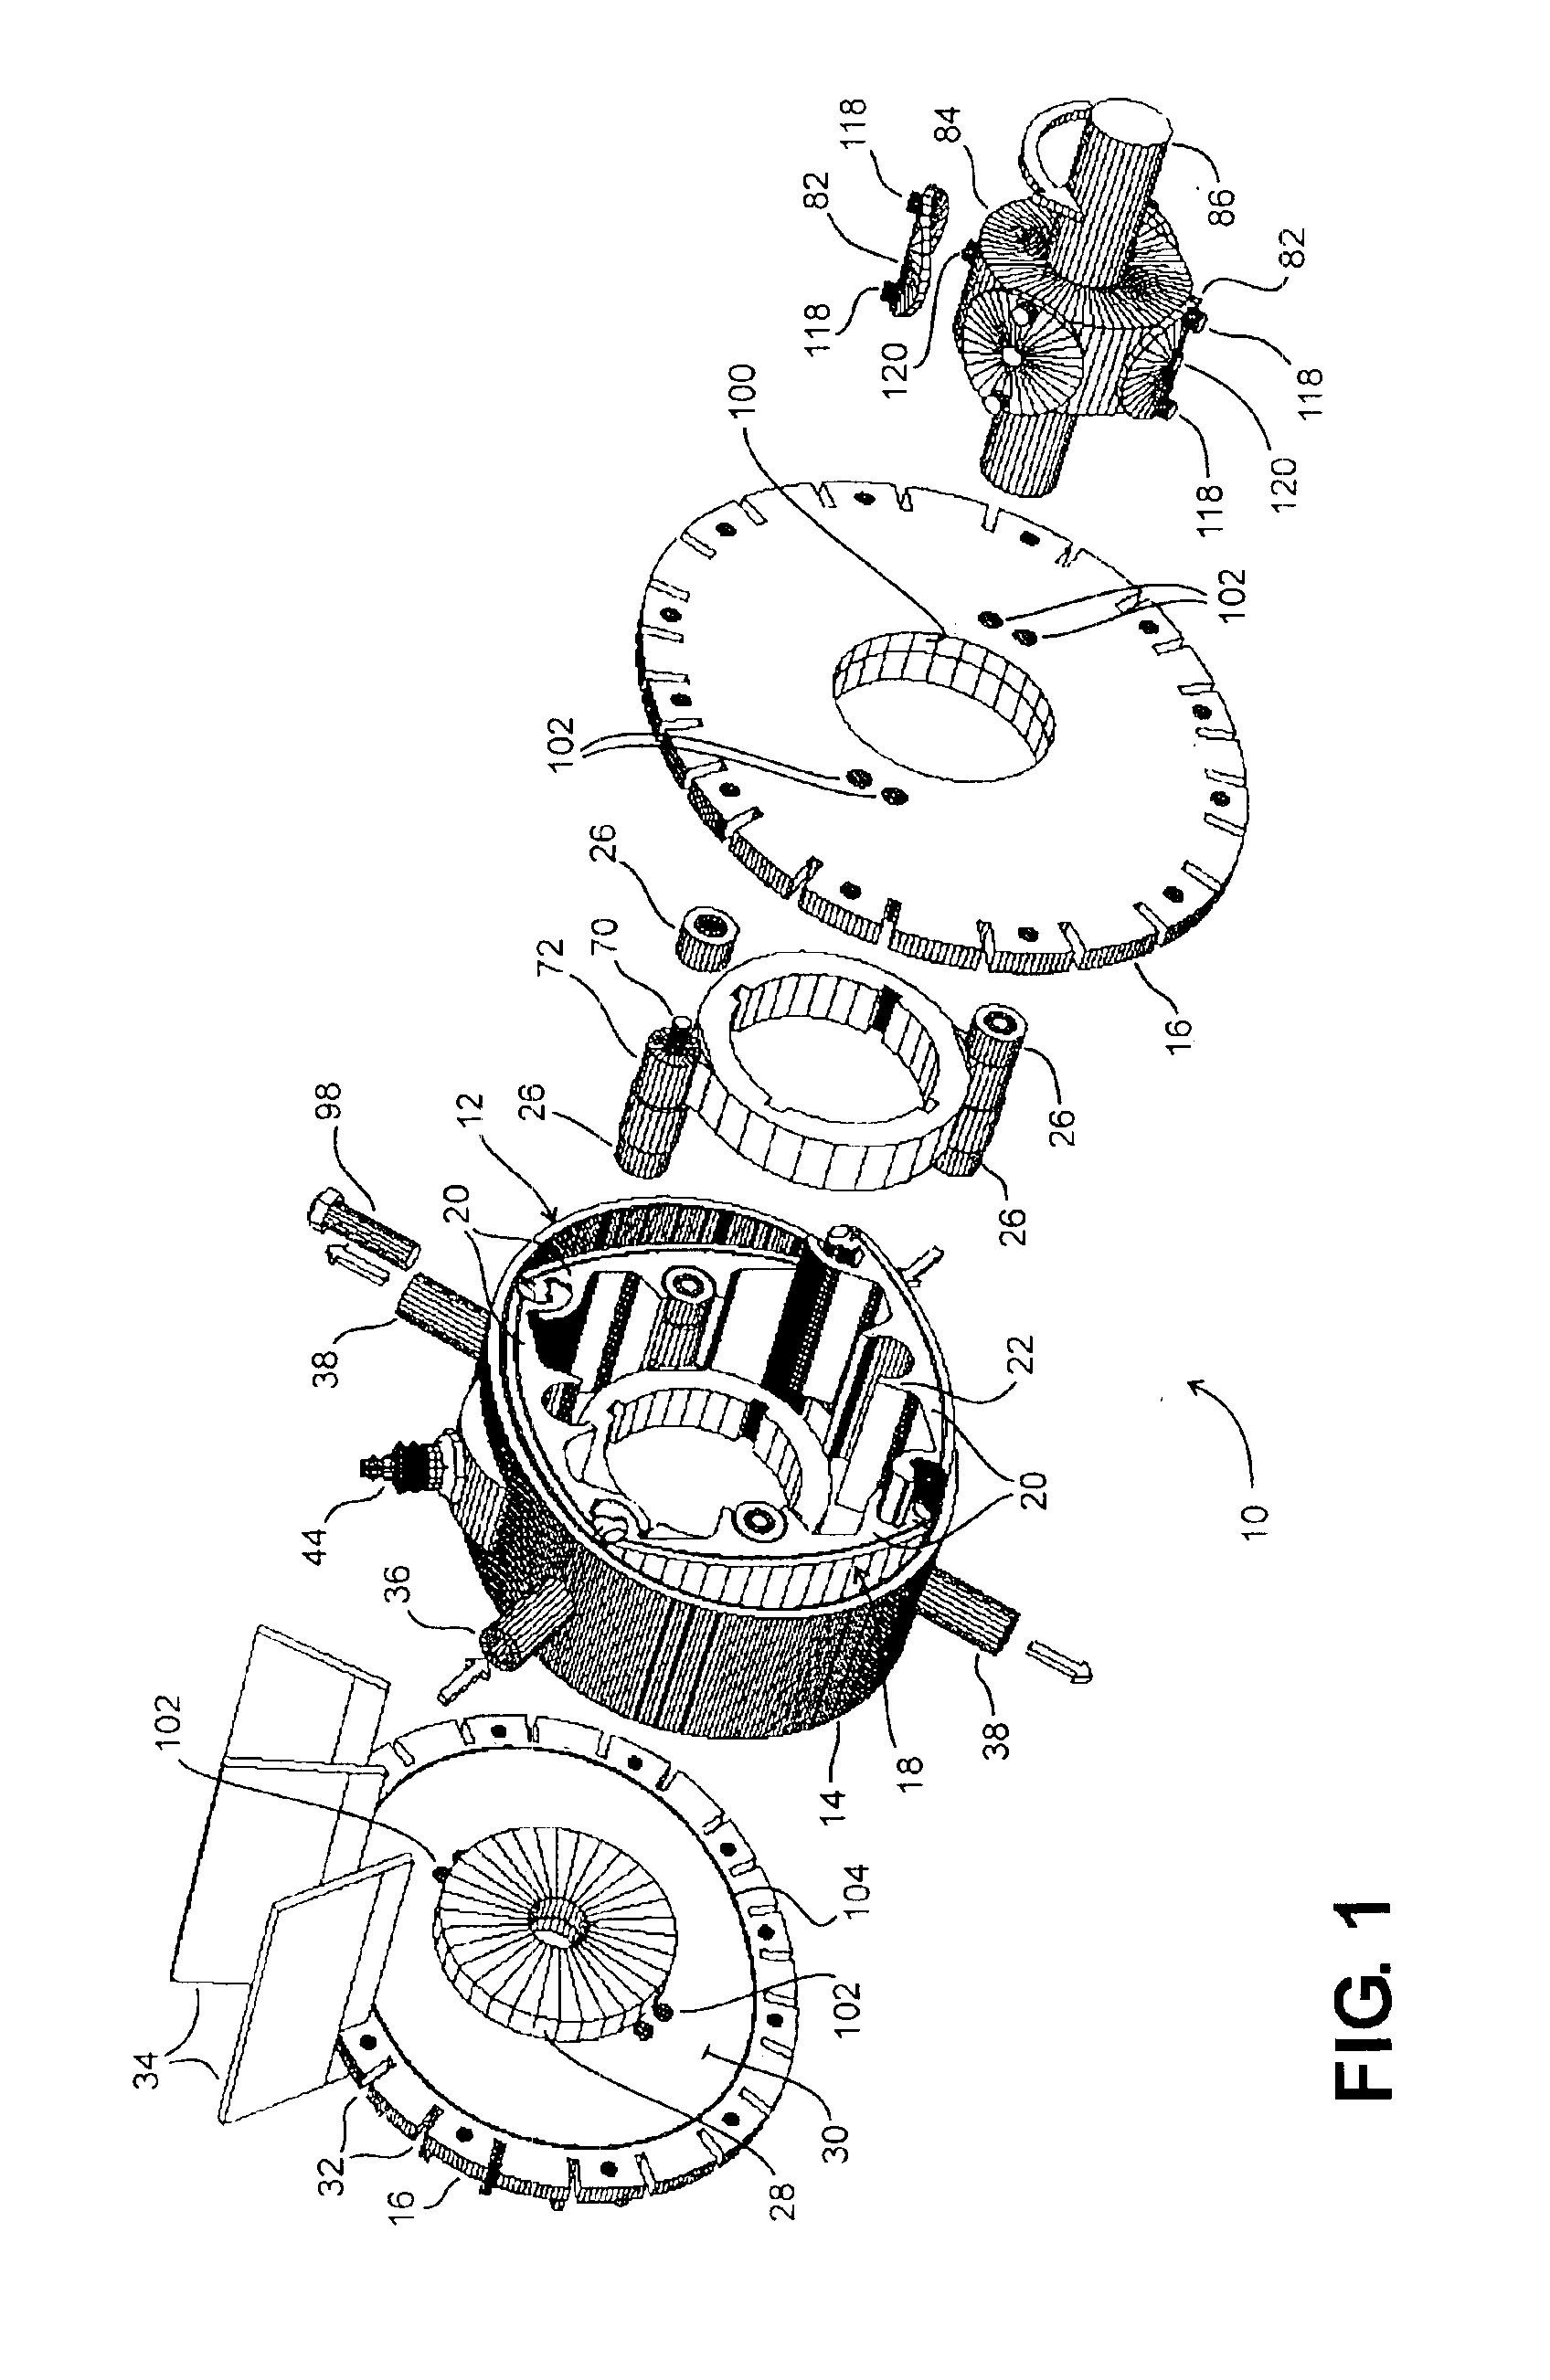 Quasiturbine (Qurbine) rotor with central annular support and ventilation